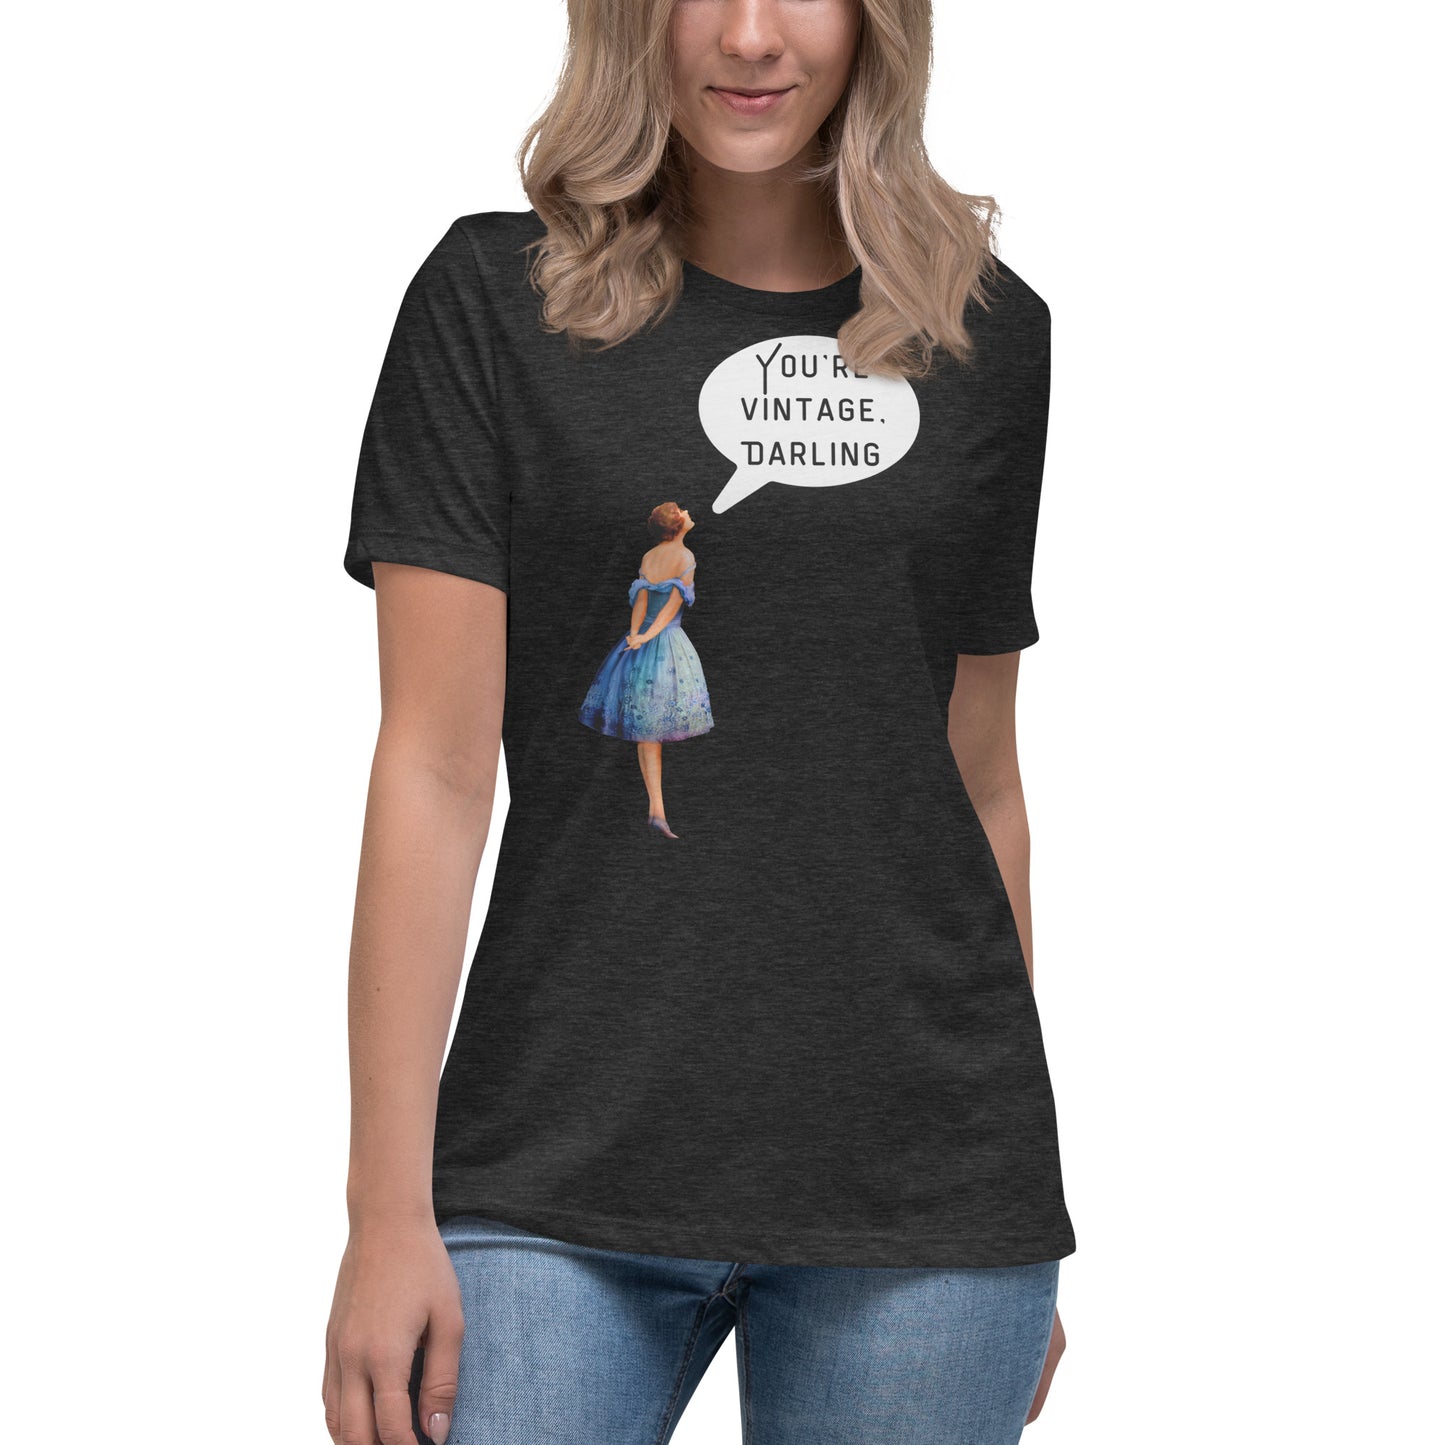 Vintage Darling Women's Relaxed T-Shirt